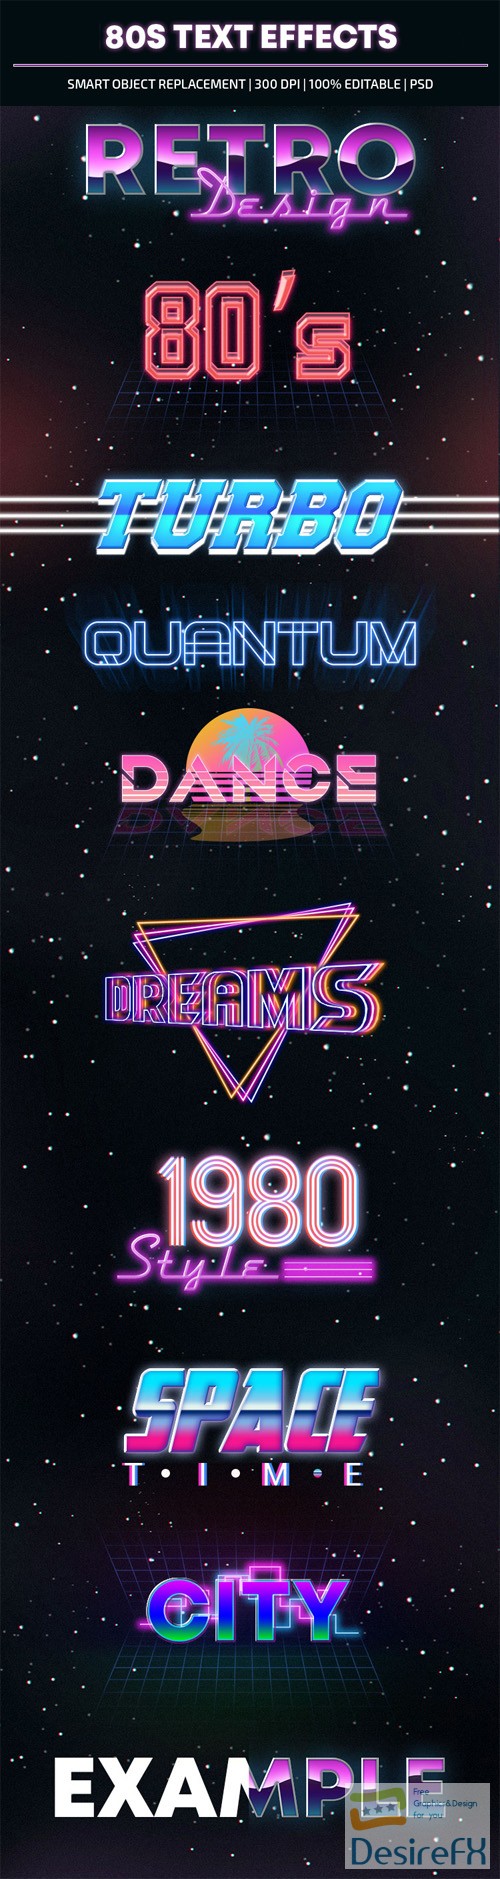 10 (80s) Text Effects for Photoshop